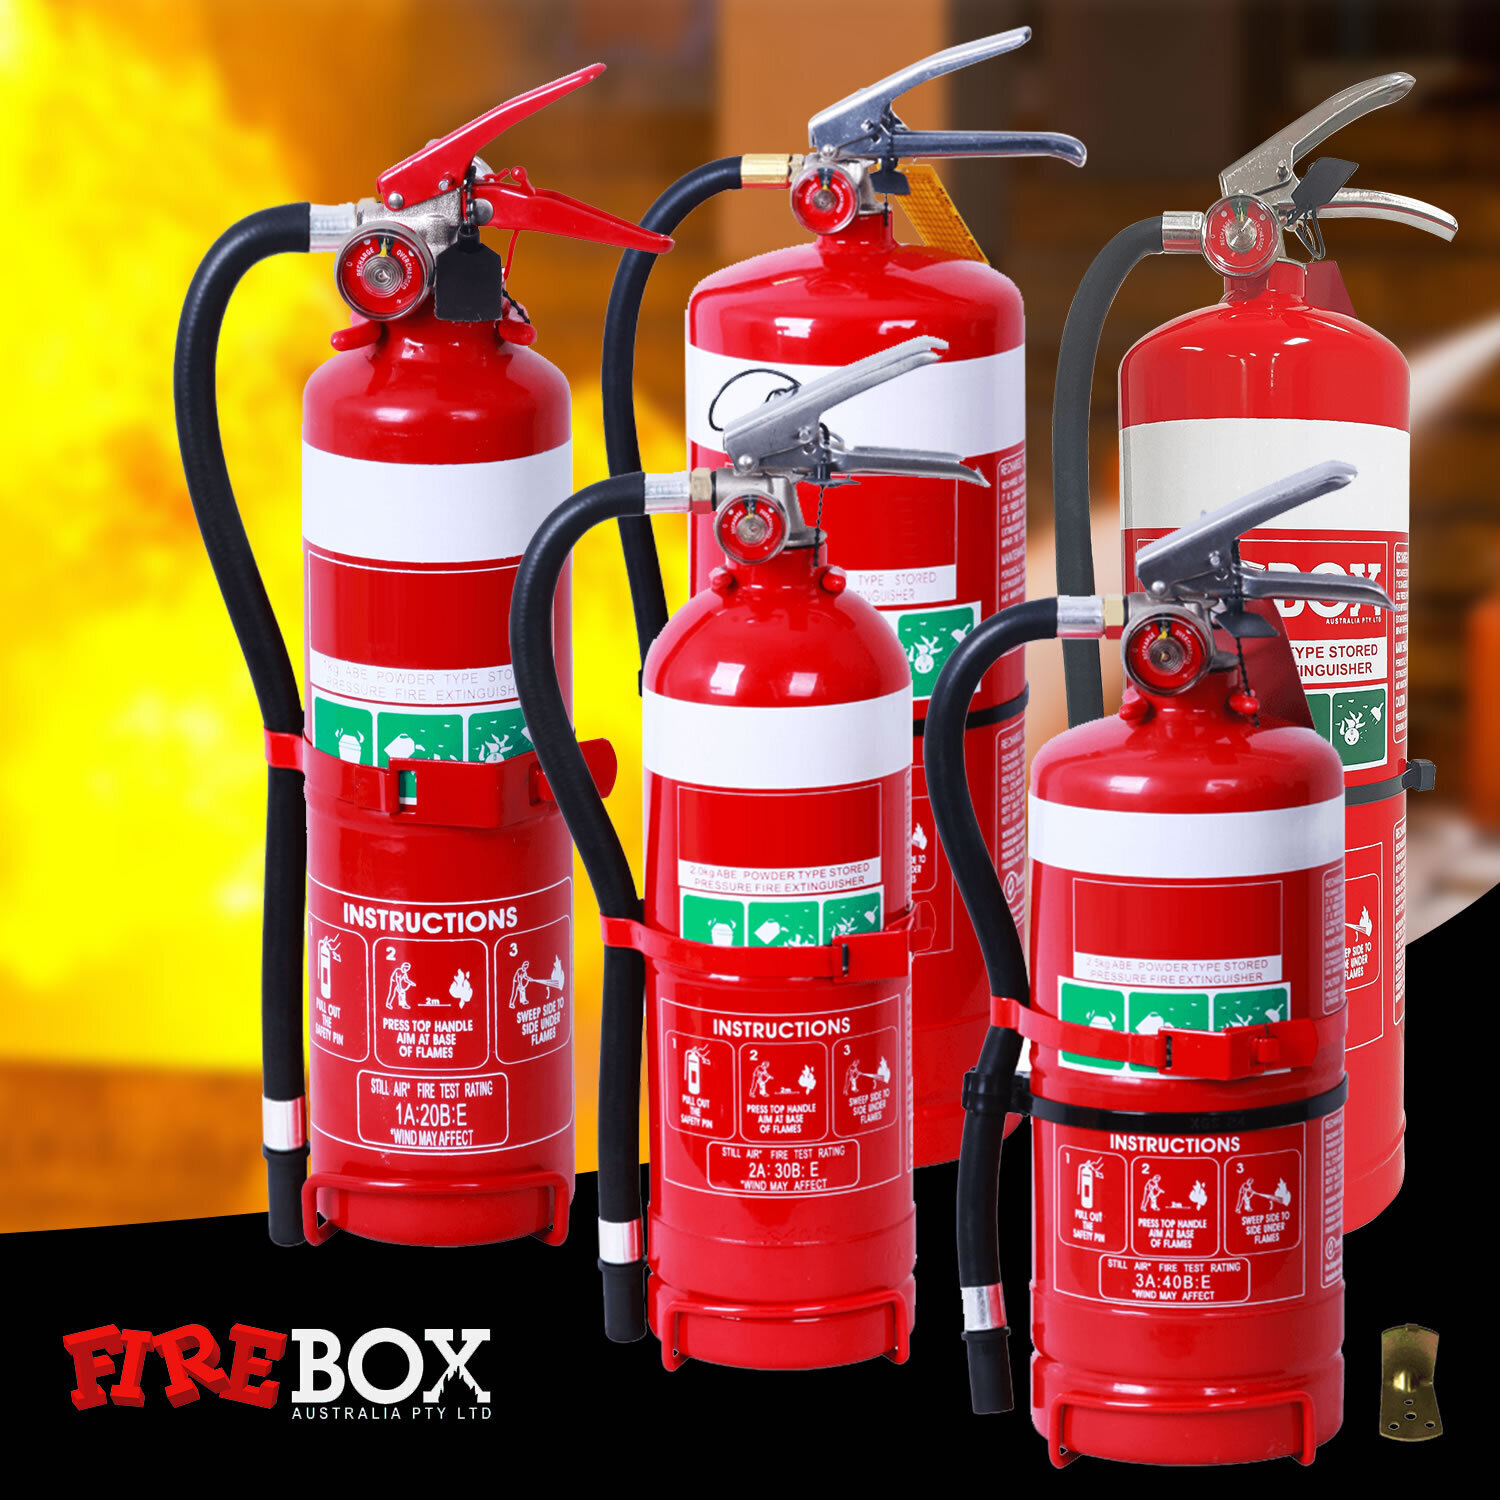 2.5KG High Pressure Dry Powder Fire Extinguisher with Vehicle and Wall Bracket